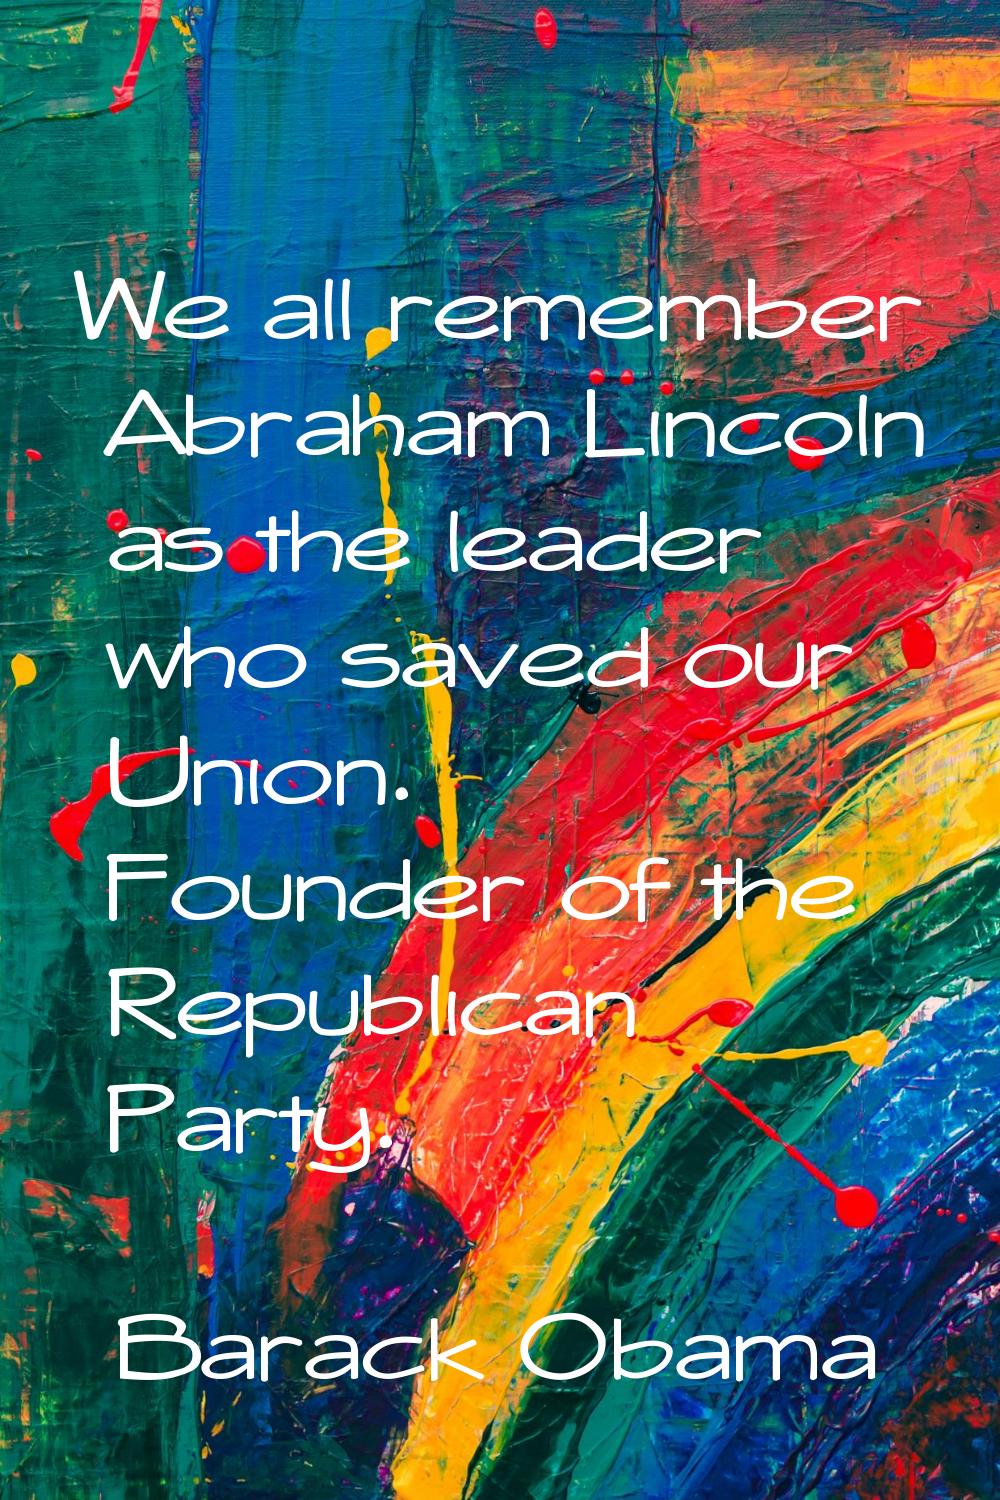 We all remember Abraham Lincoln as the leader who saved our Union. Founder of the Republican Party.